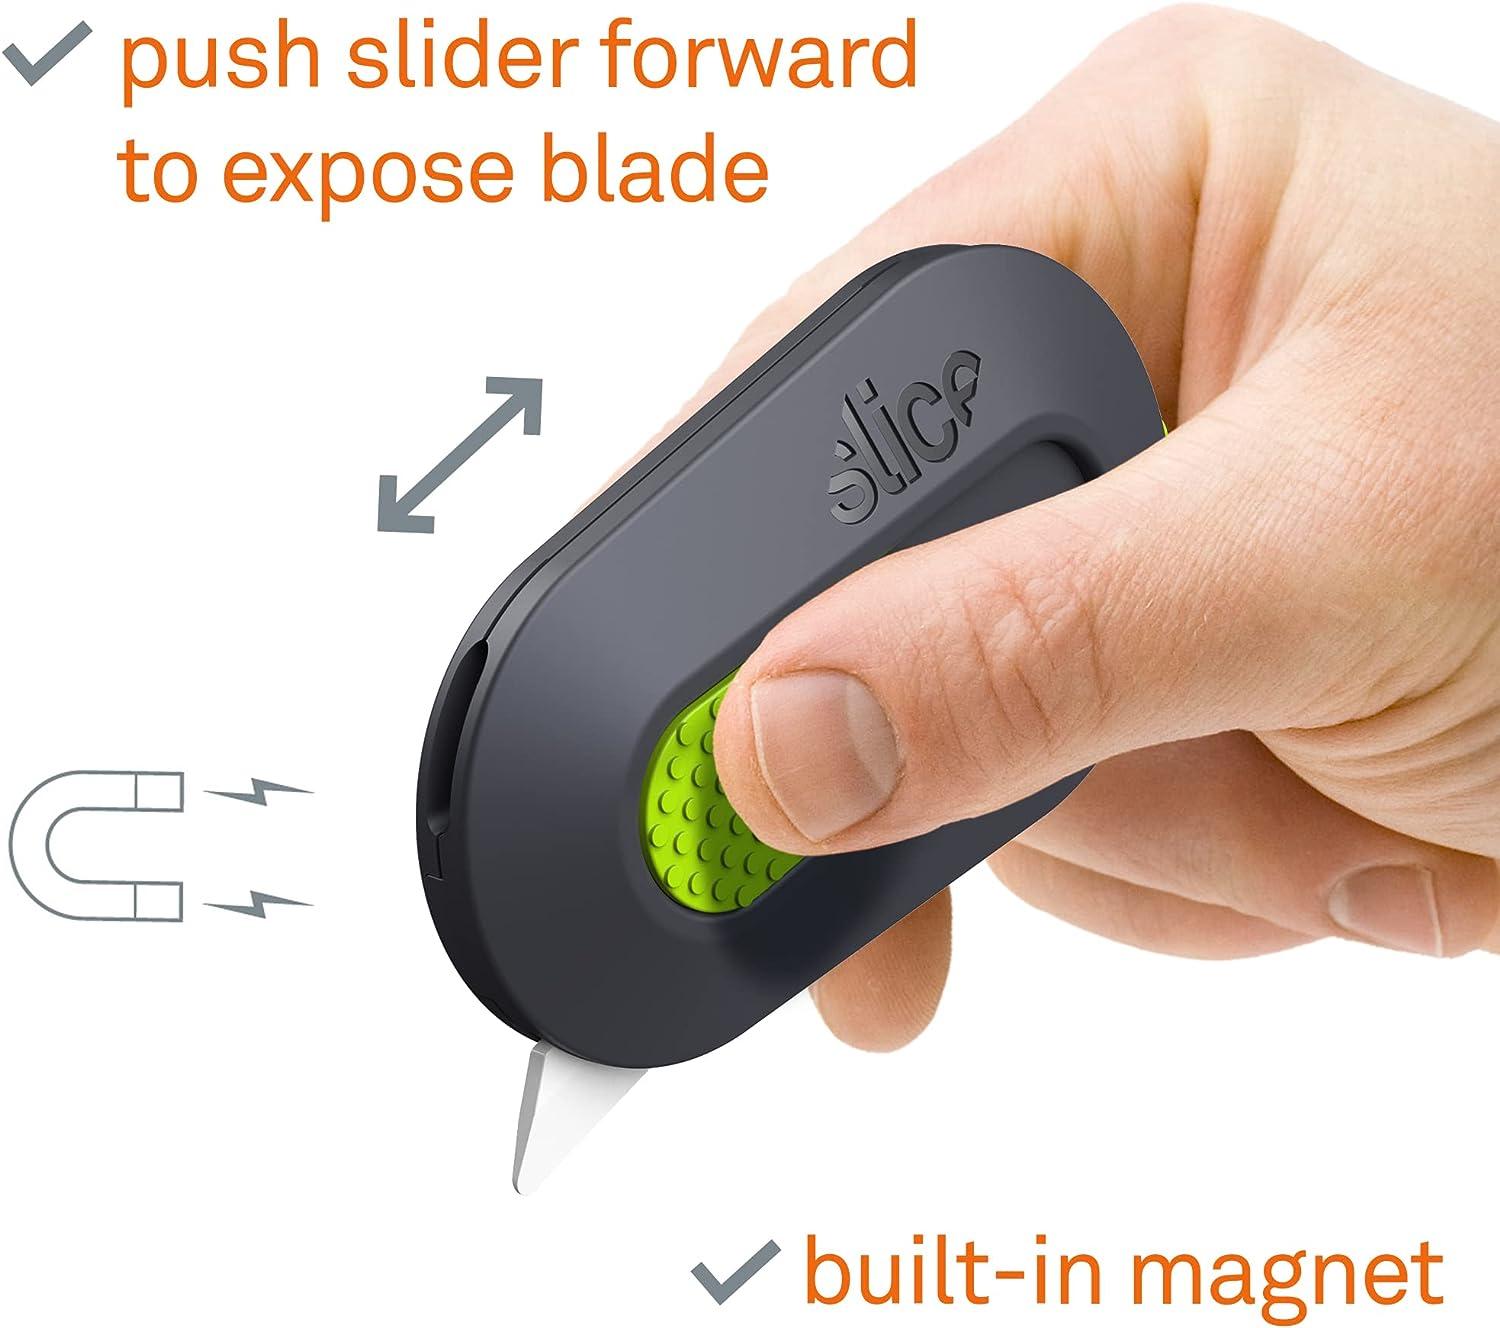 Slice 10514 Mini Box Cutter, Package and Box Opener, Safe Ceramic Blade  Retracts Automatically, Stays Sharp Up to 11x Longer, Right or Left Handed